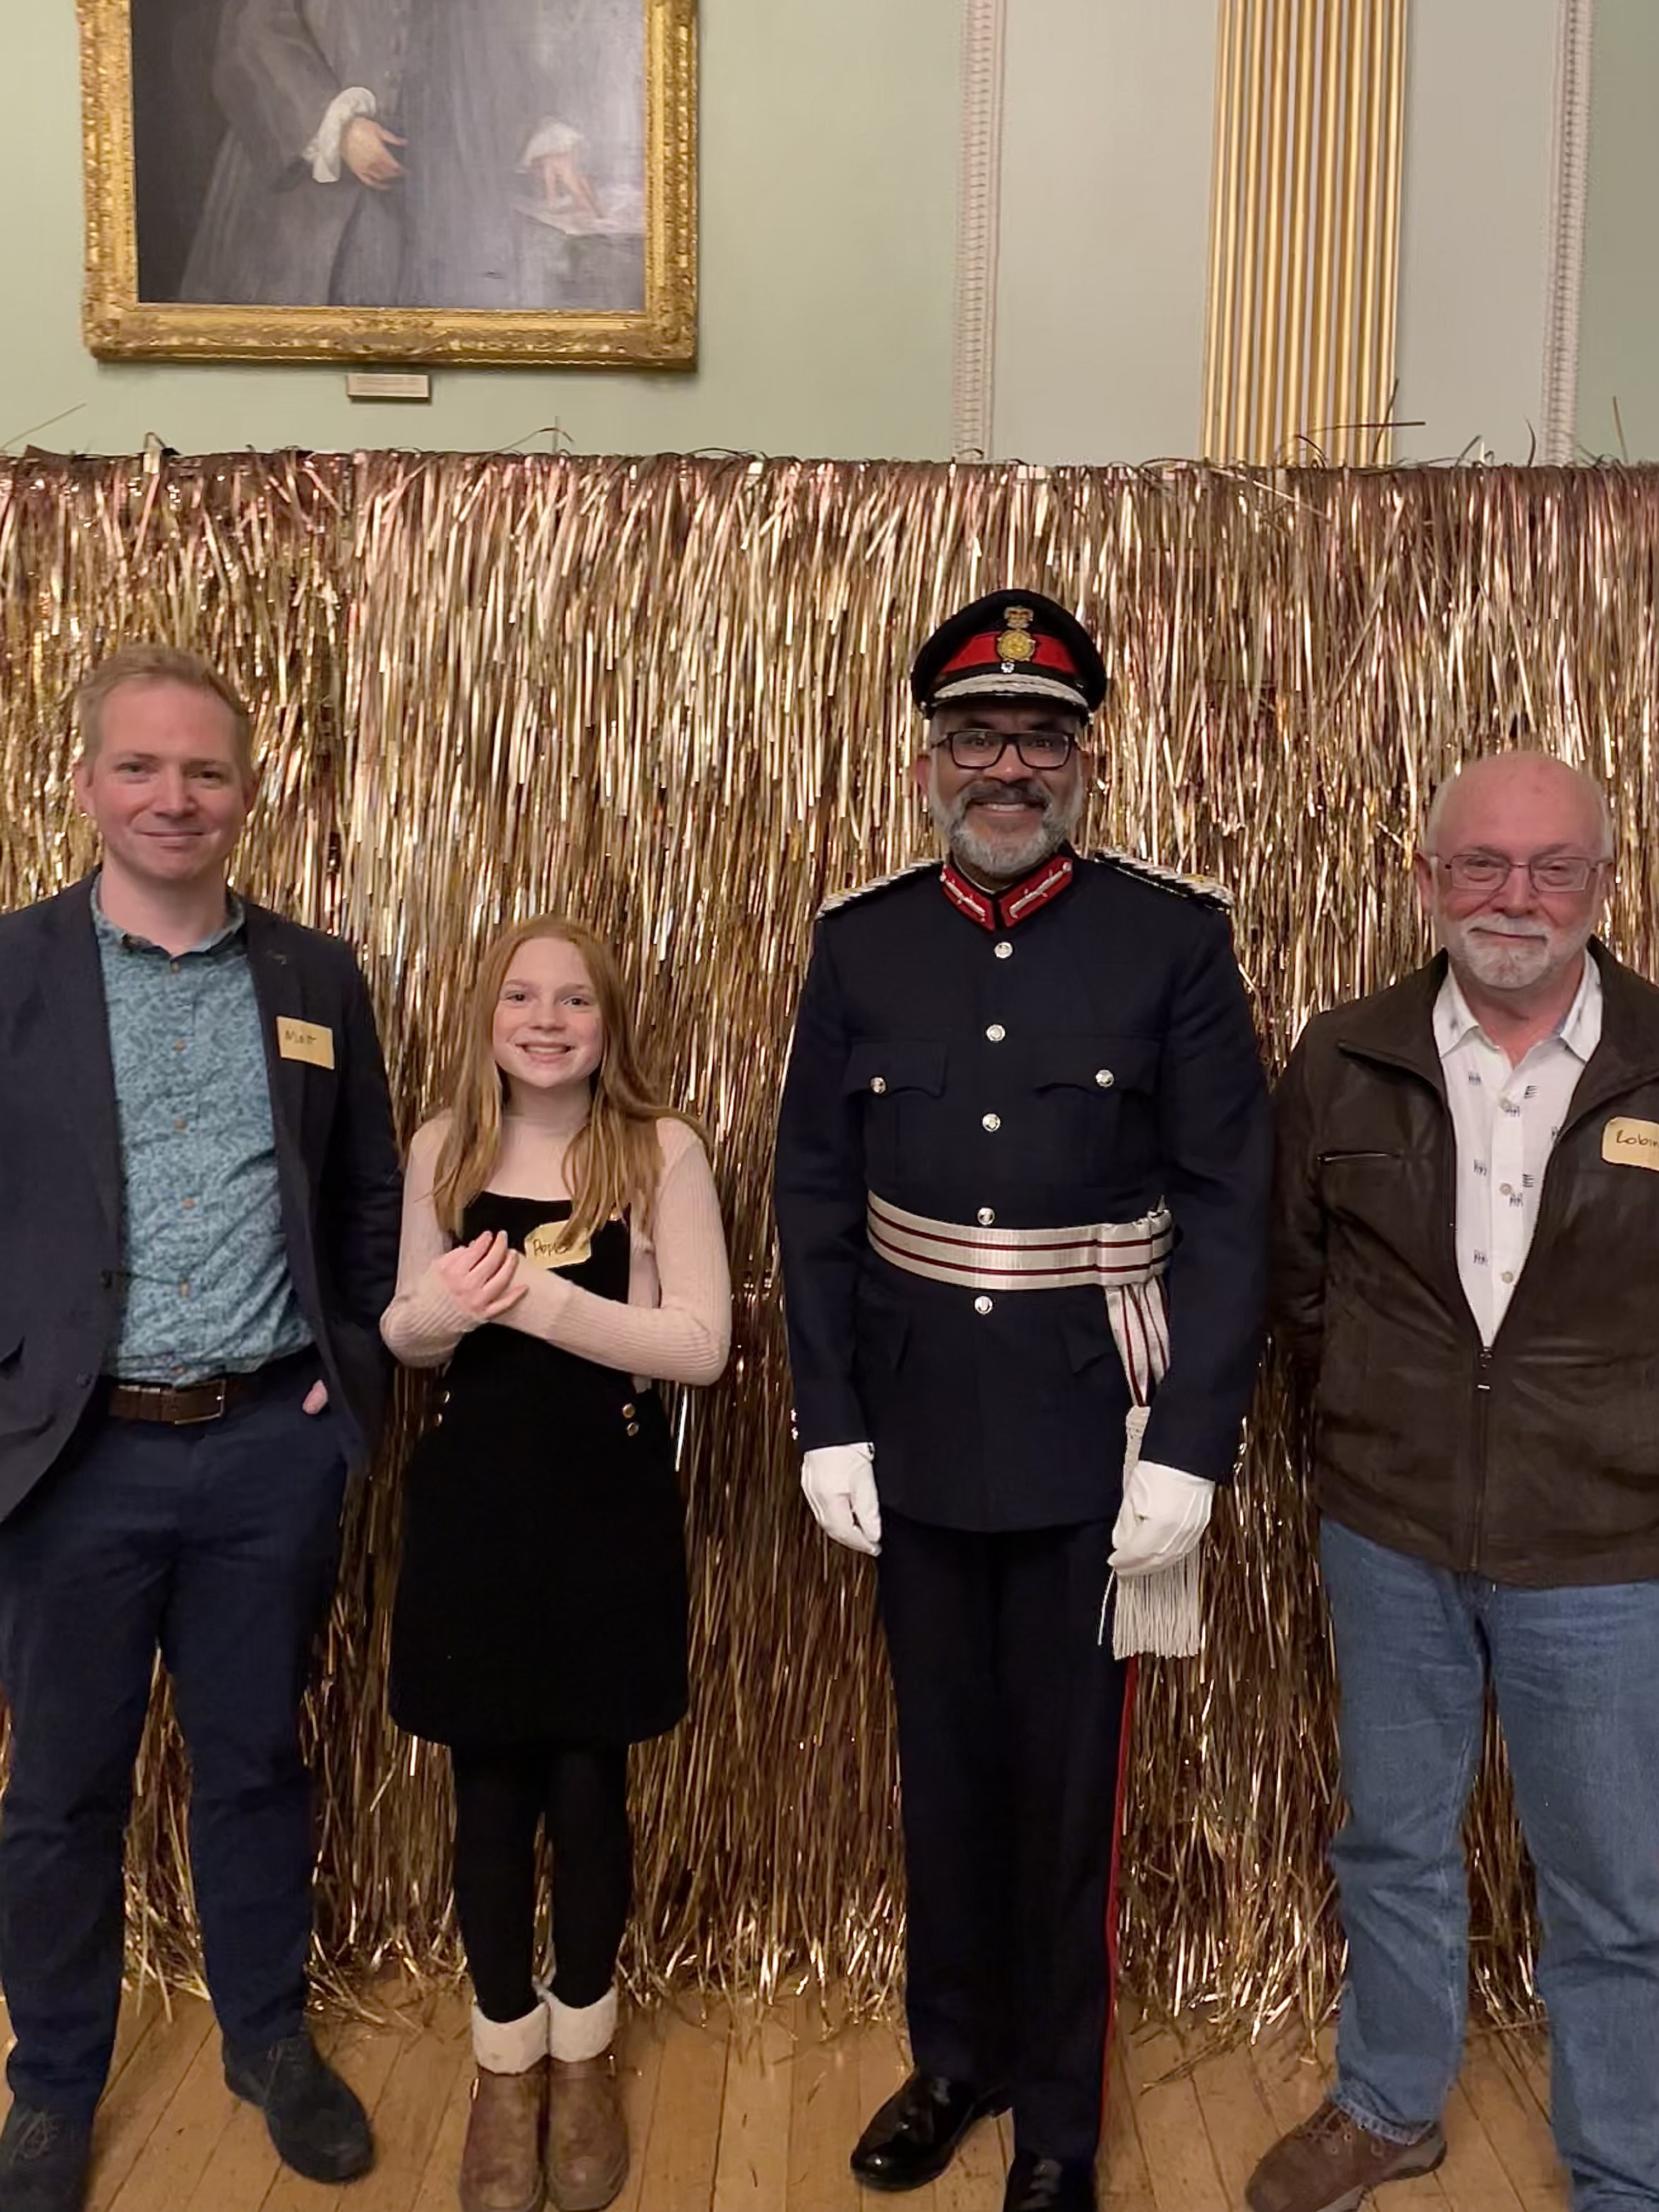 Three Generations of Repairers with the King's Lieutenant!